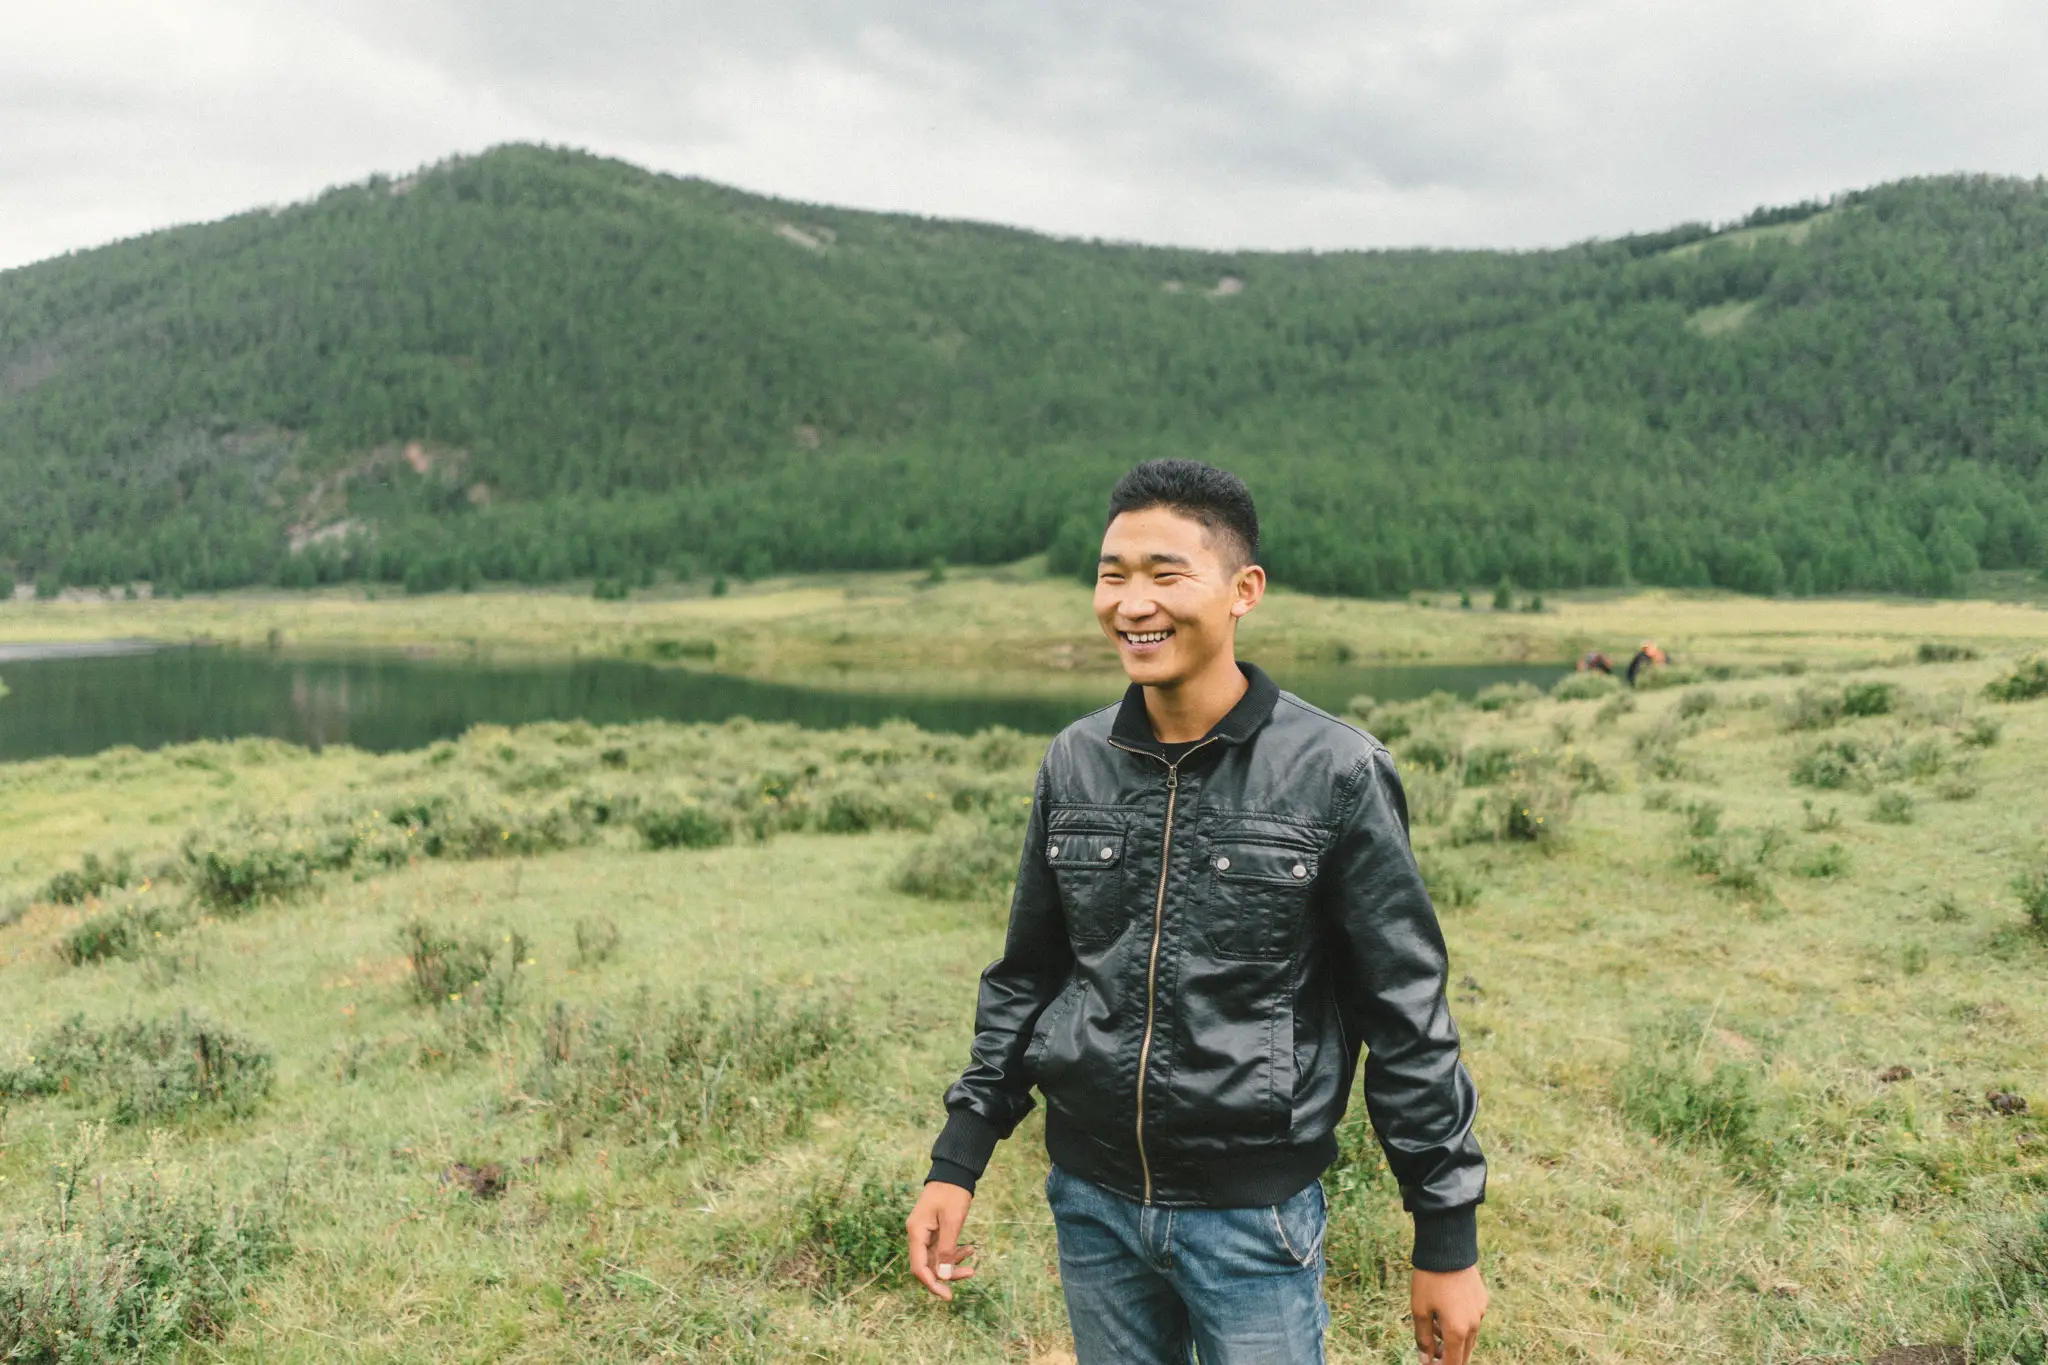 My awesome guide who took me and two others around Mongolia for 12 days